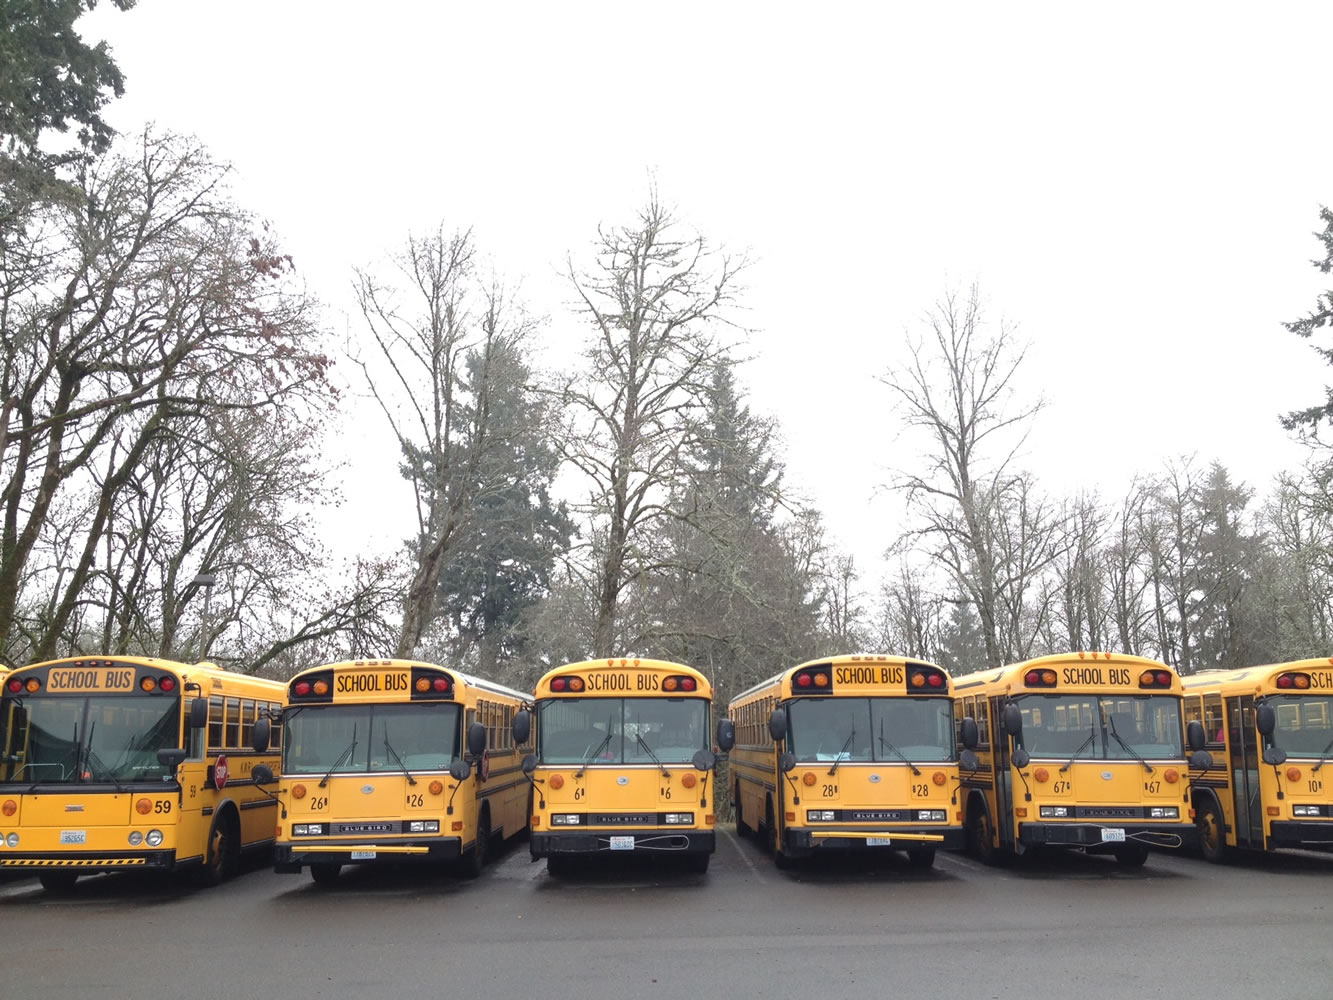 Buses sit unoccupied in La Center on Wednesday after freezing fog closed and delayed several Clark County schools.